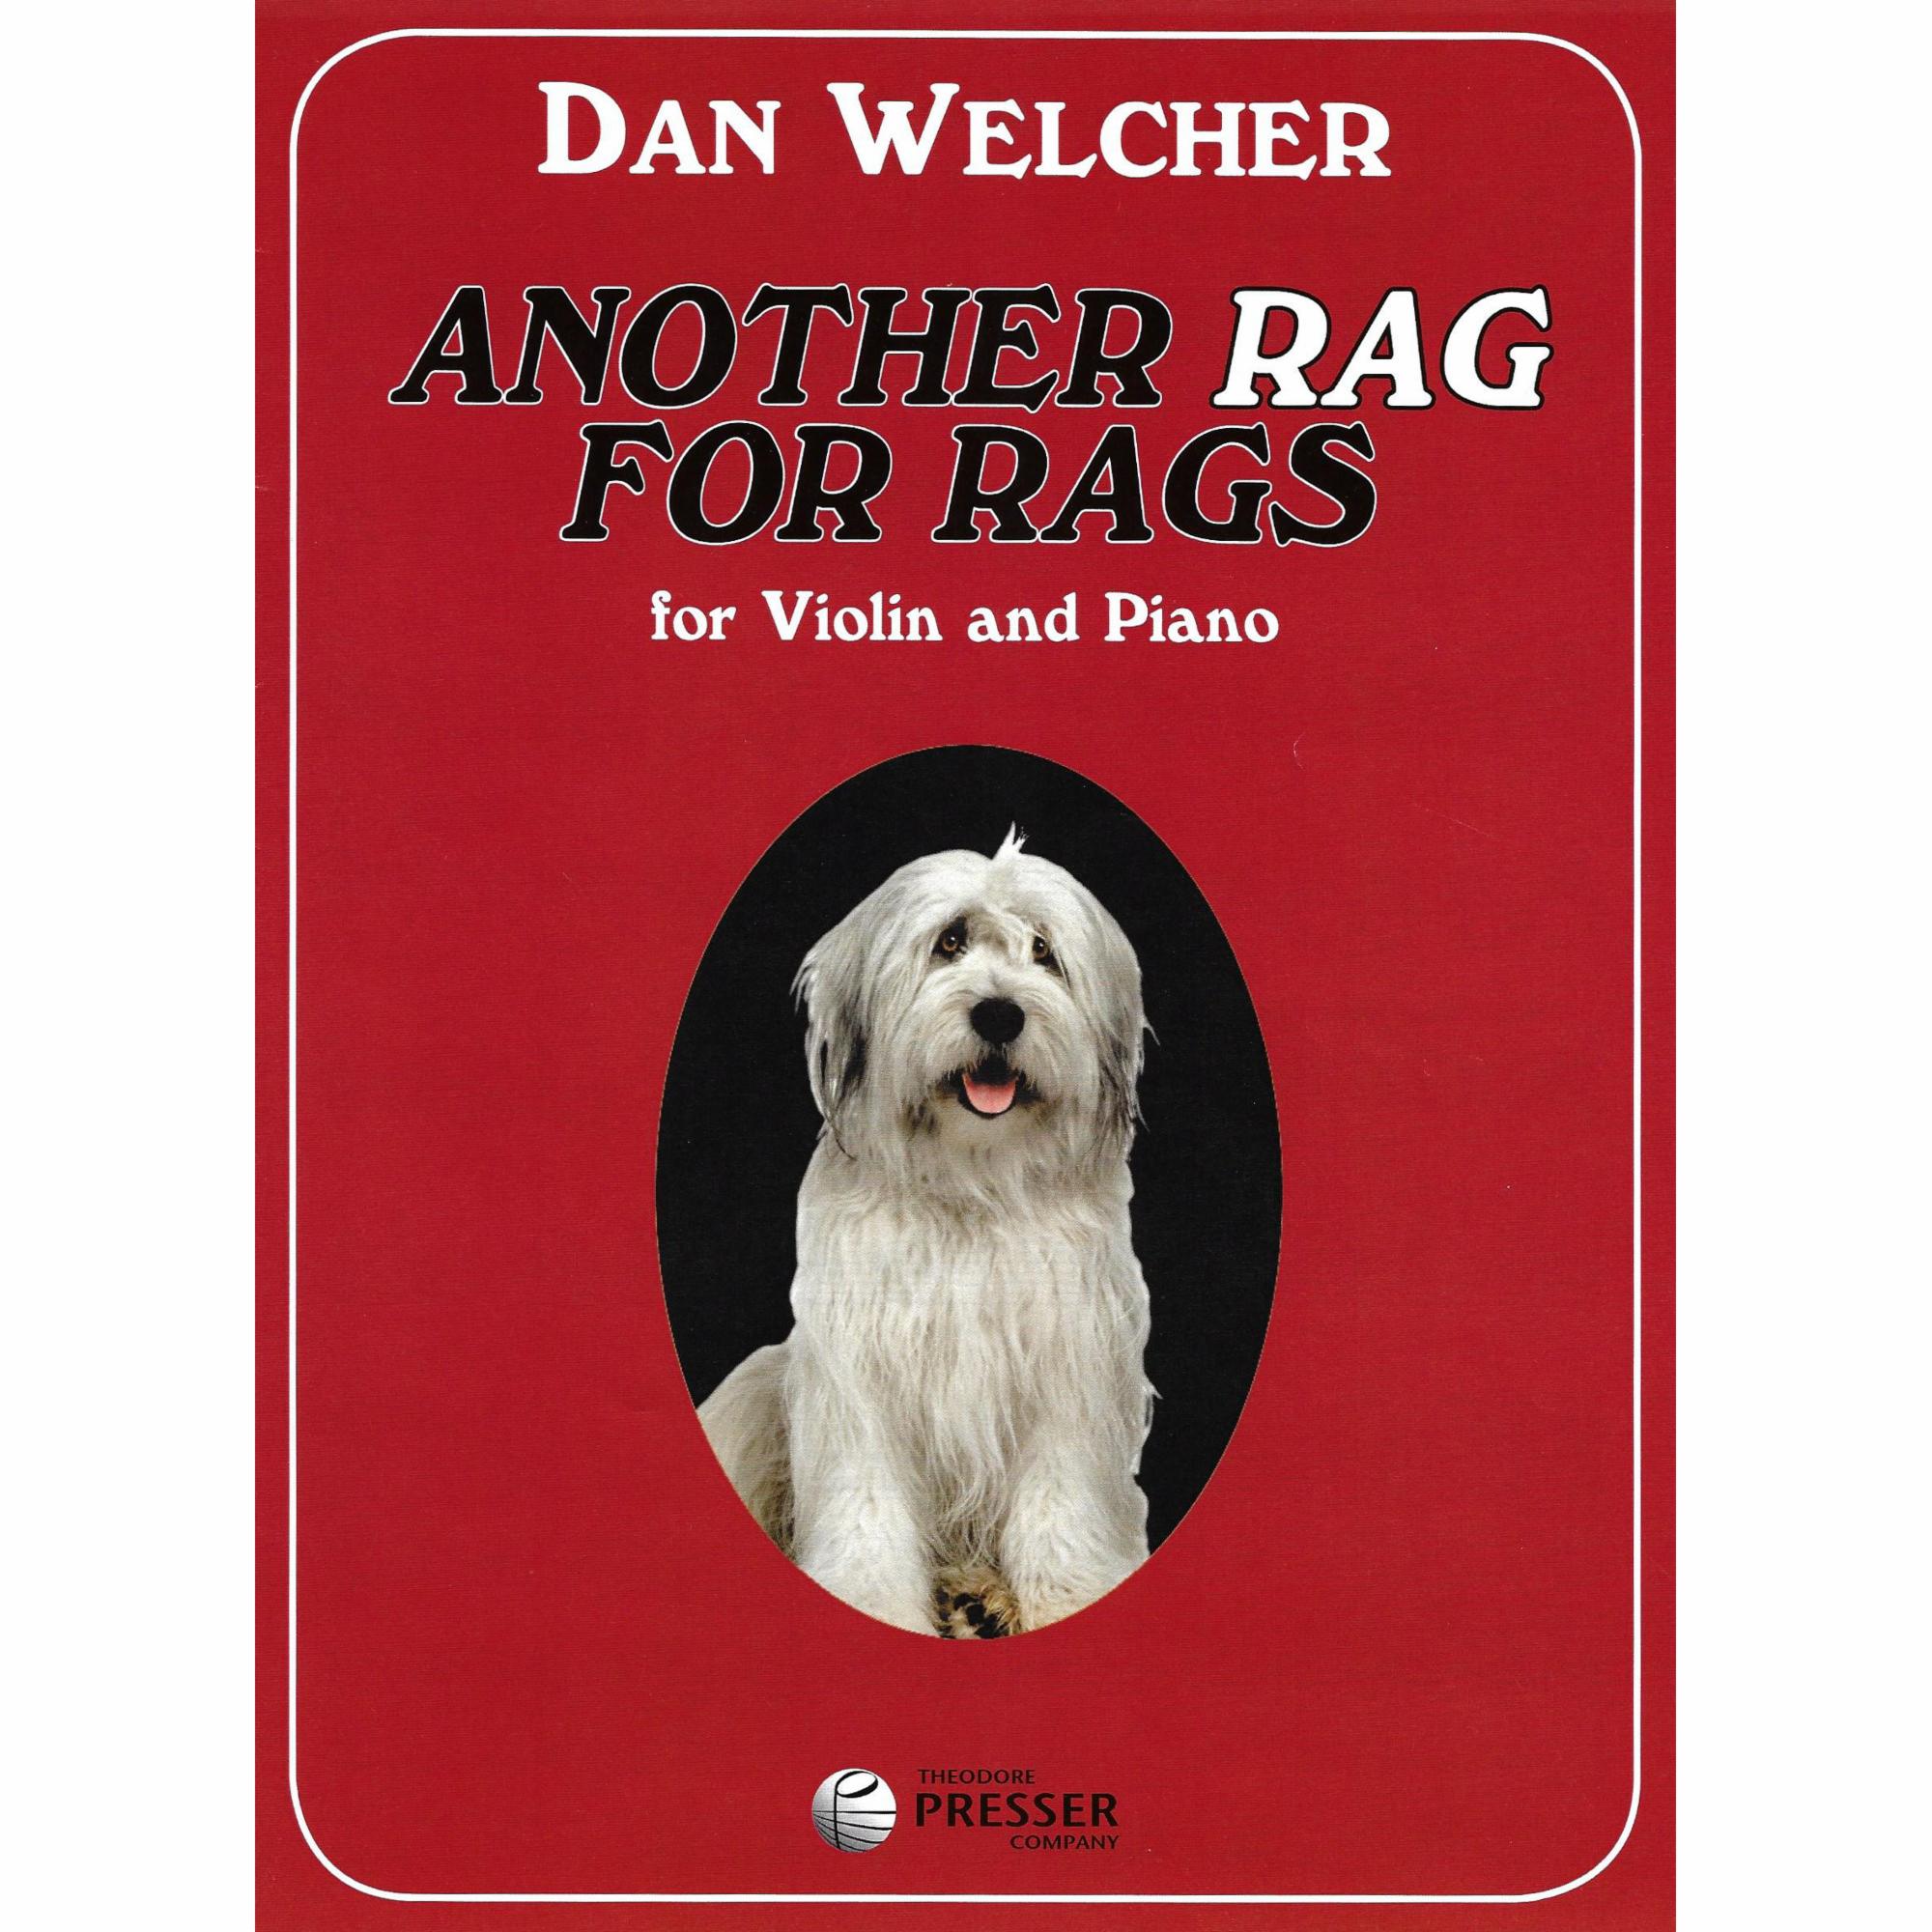 Another Rag for Rags for Violin and Piano